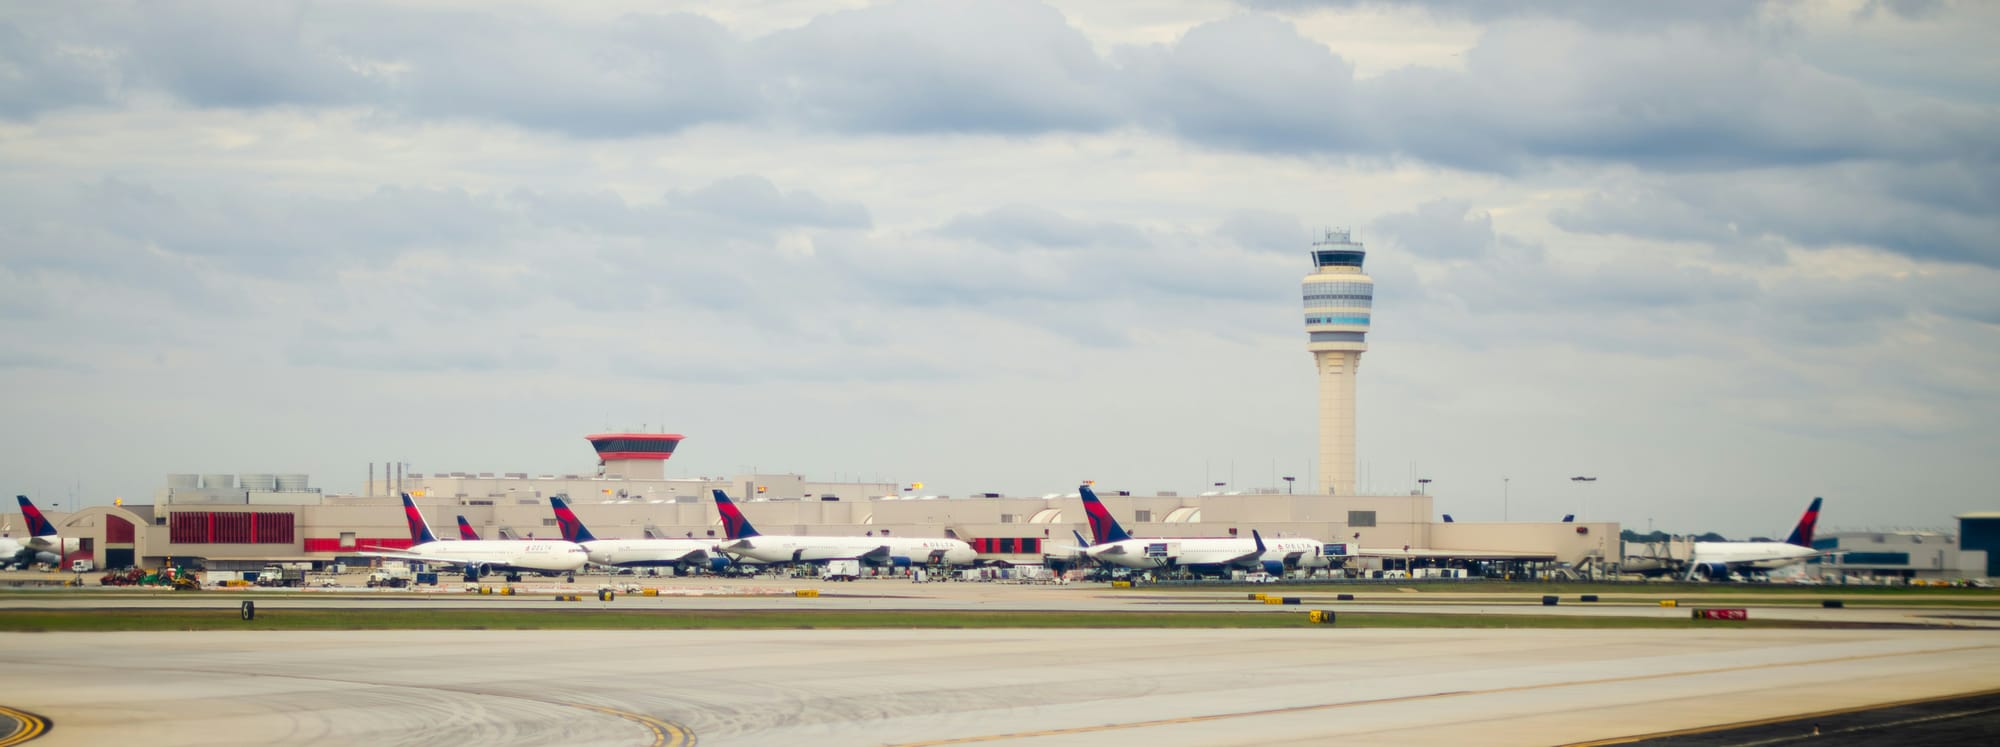 10 Busiest Airports in the World